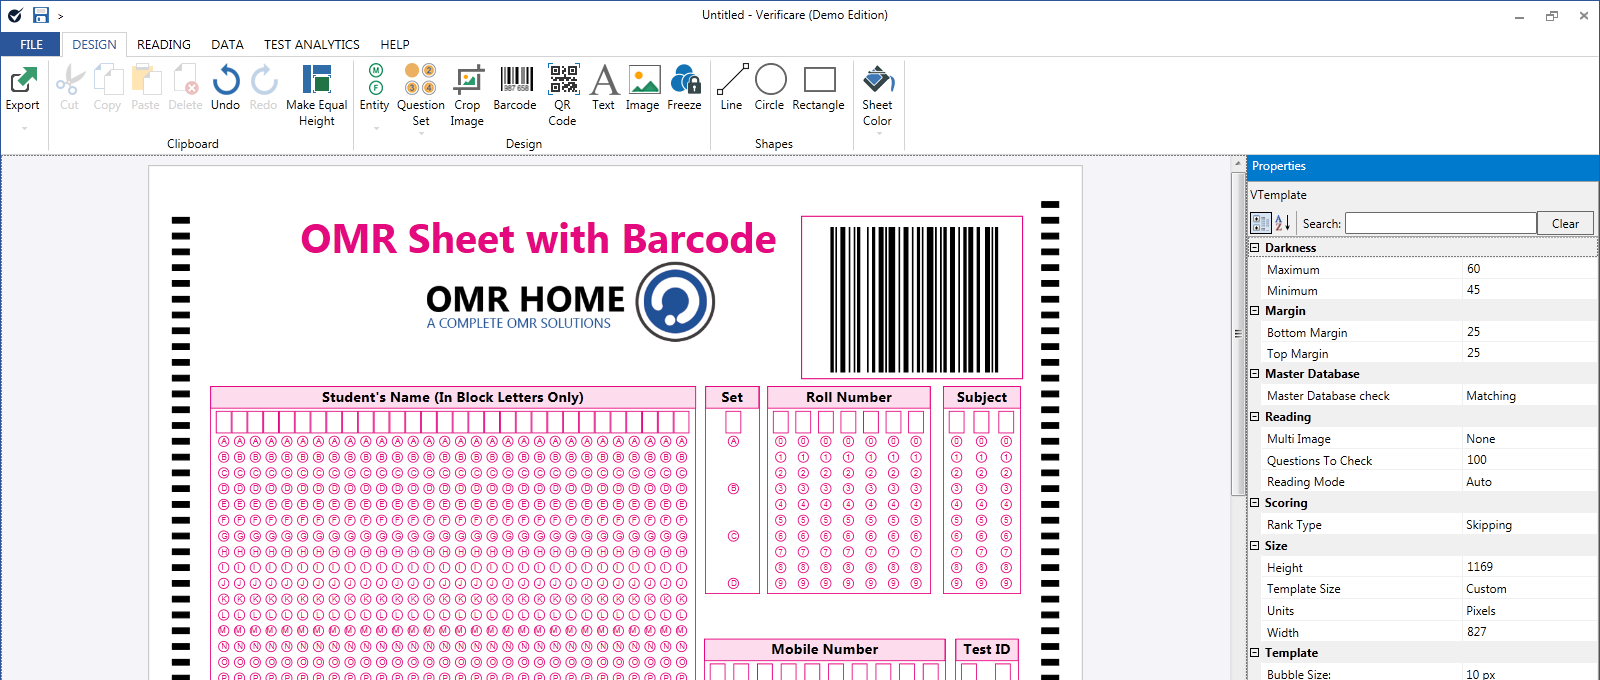 Omr-sheet-with-barcode